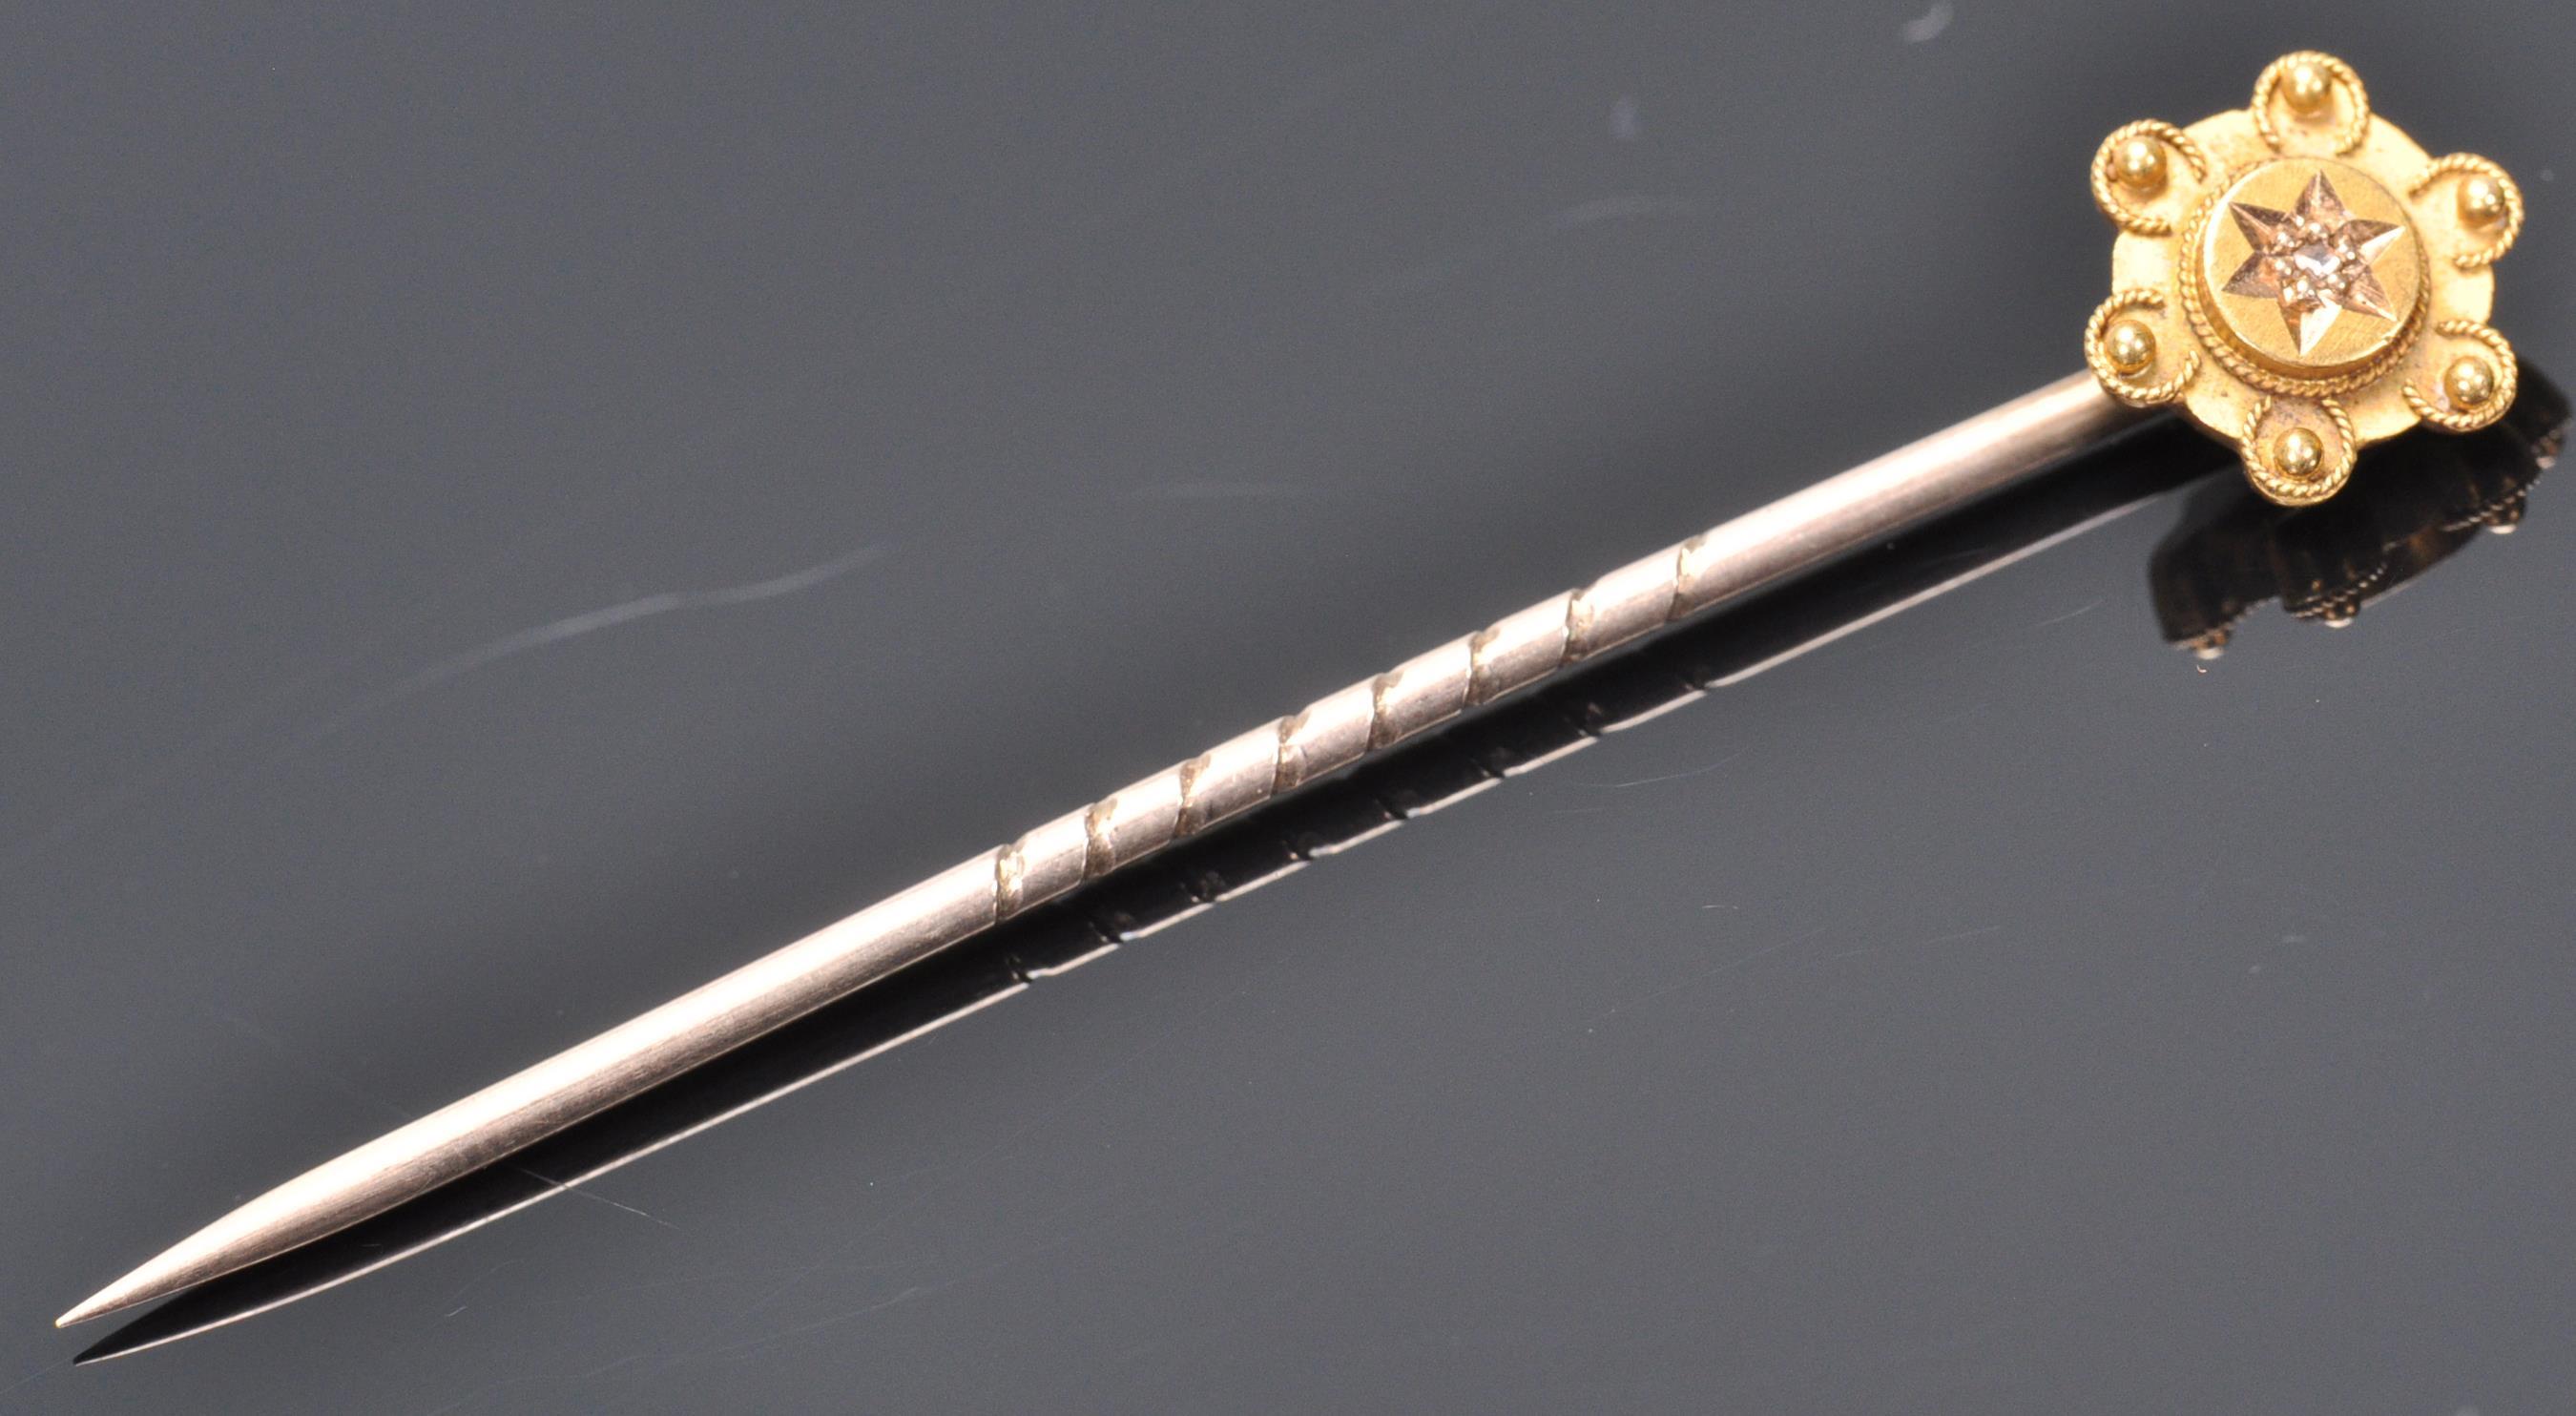 A 9ct gold toped tie pin having wire work and ball finial decoration set with a single diamond chip.